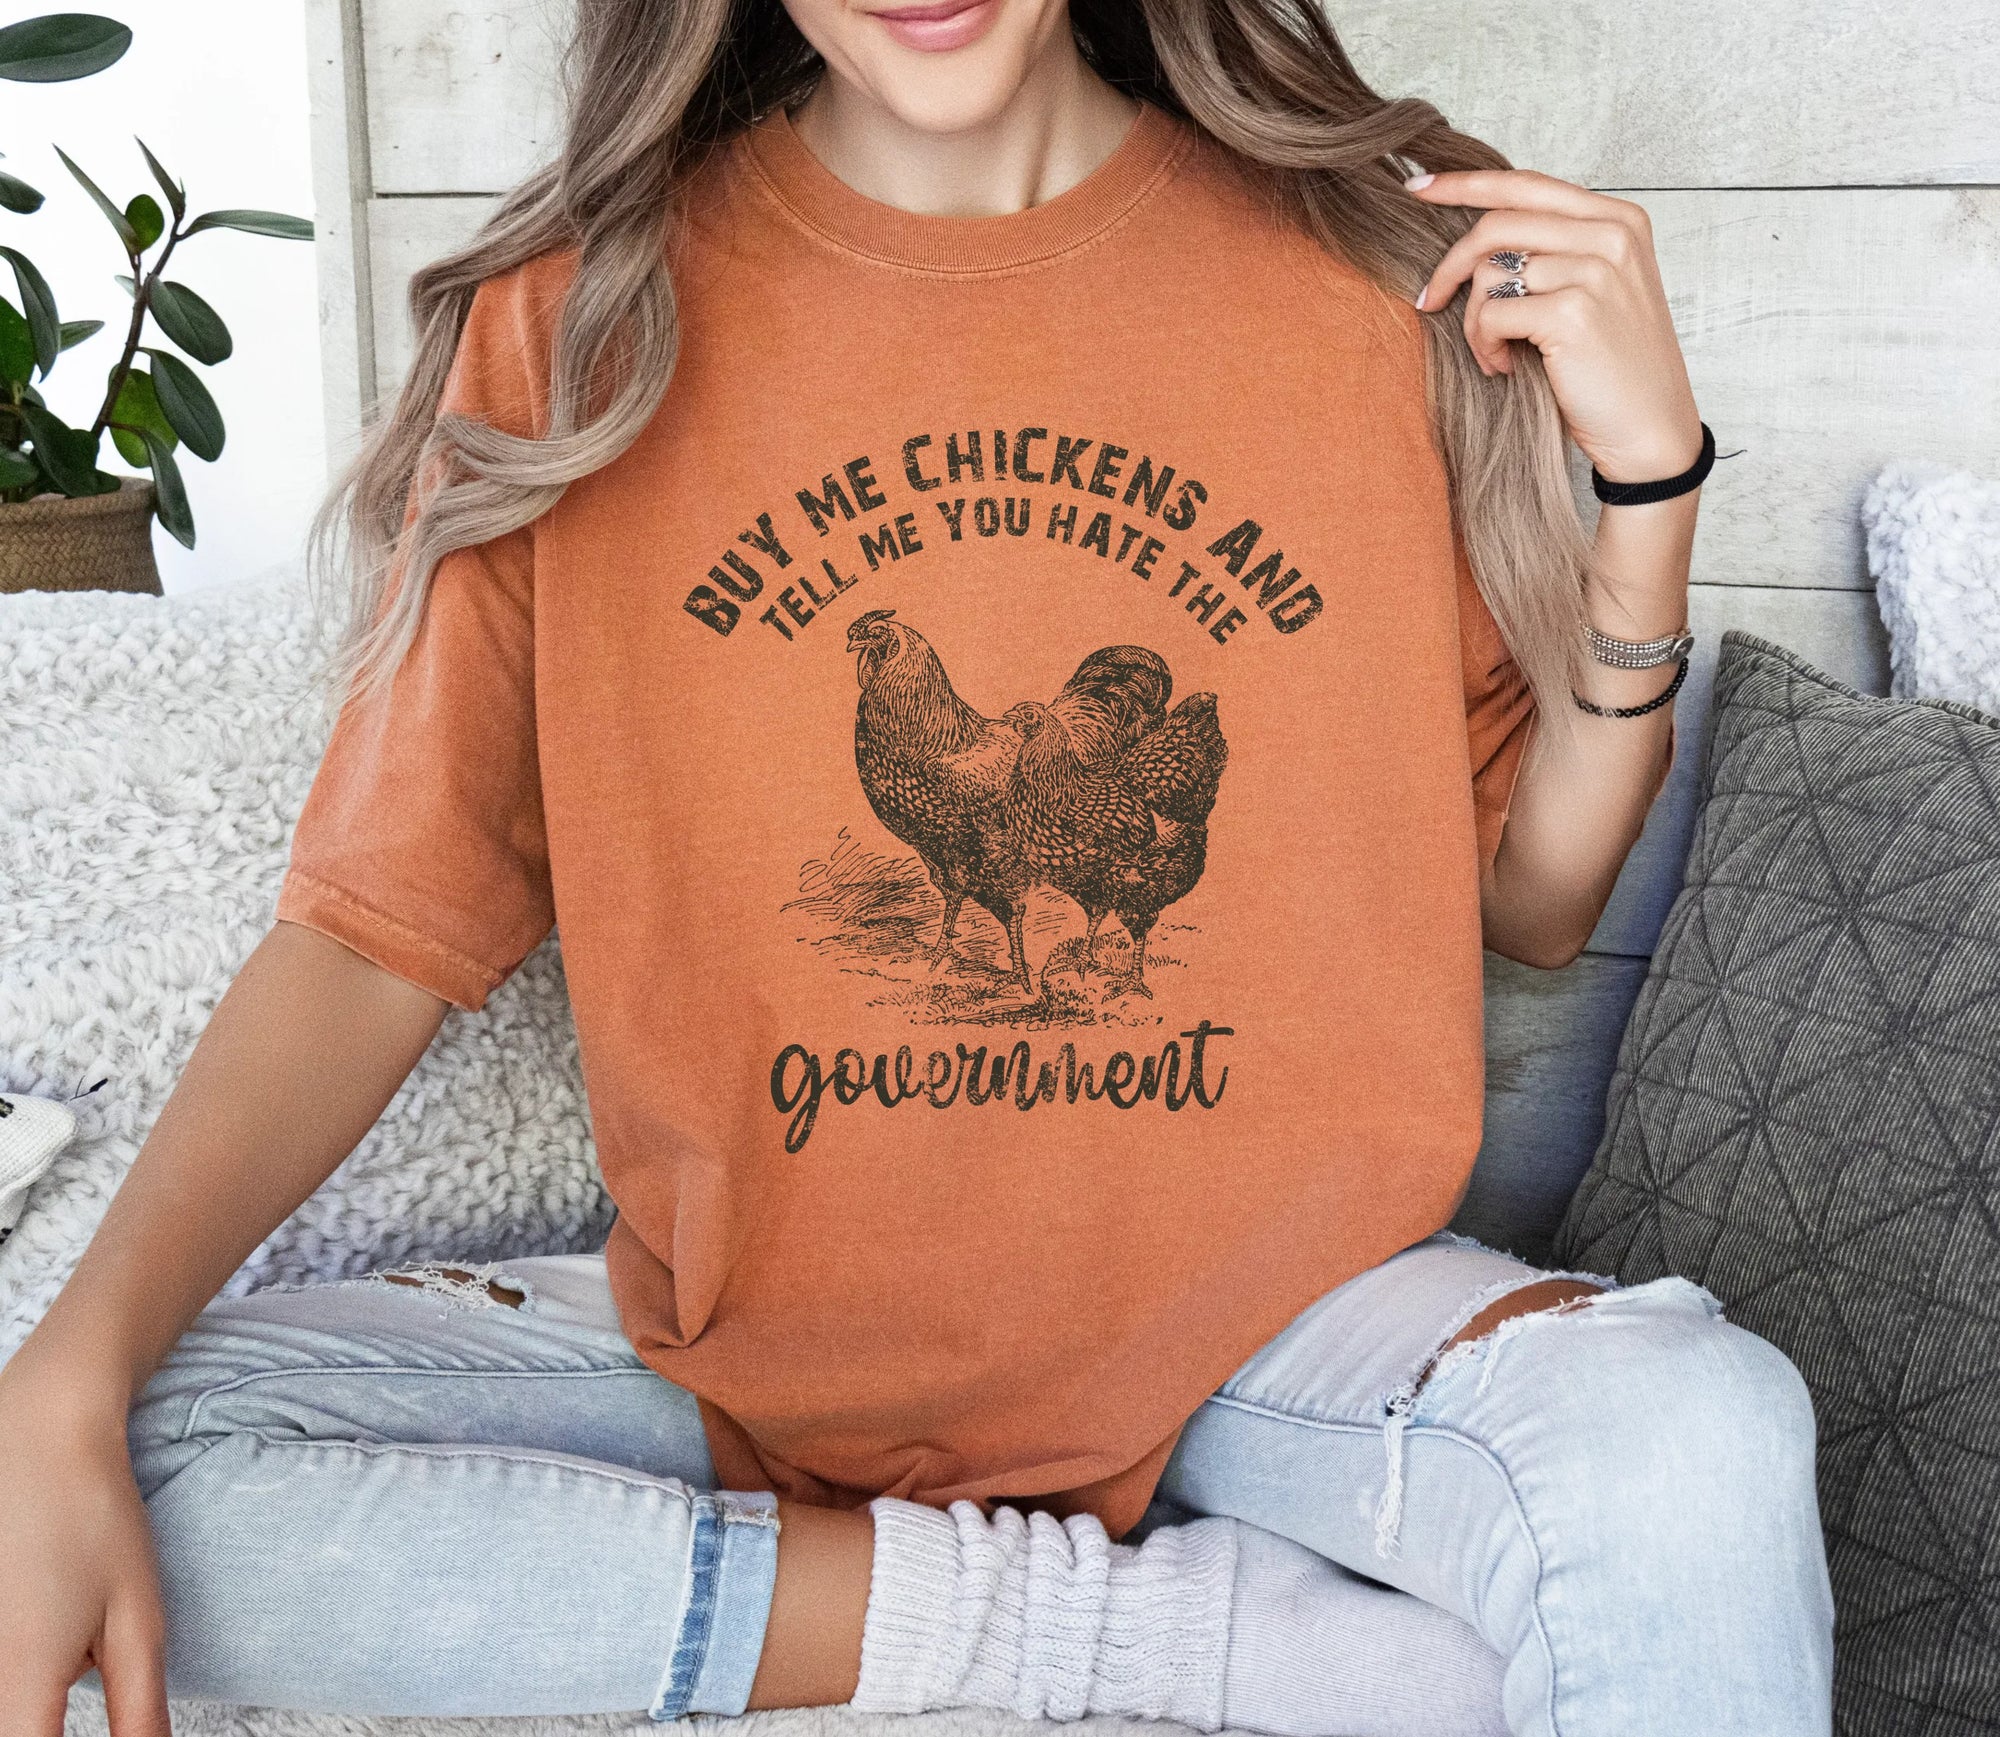 Buy Me Chickens & Tell Me You Hate The Government T-Shirt